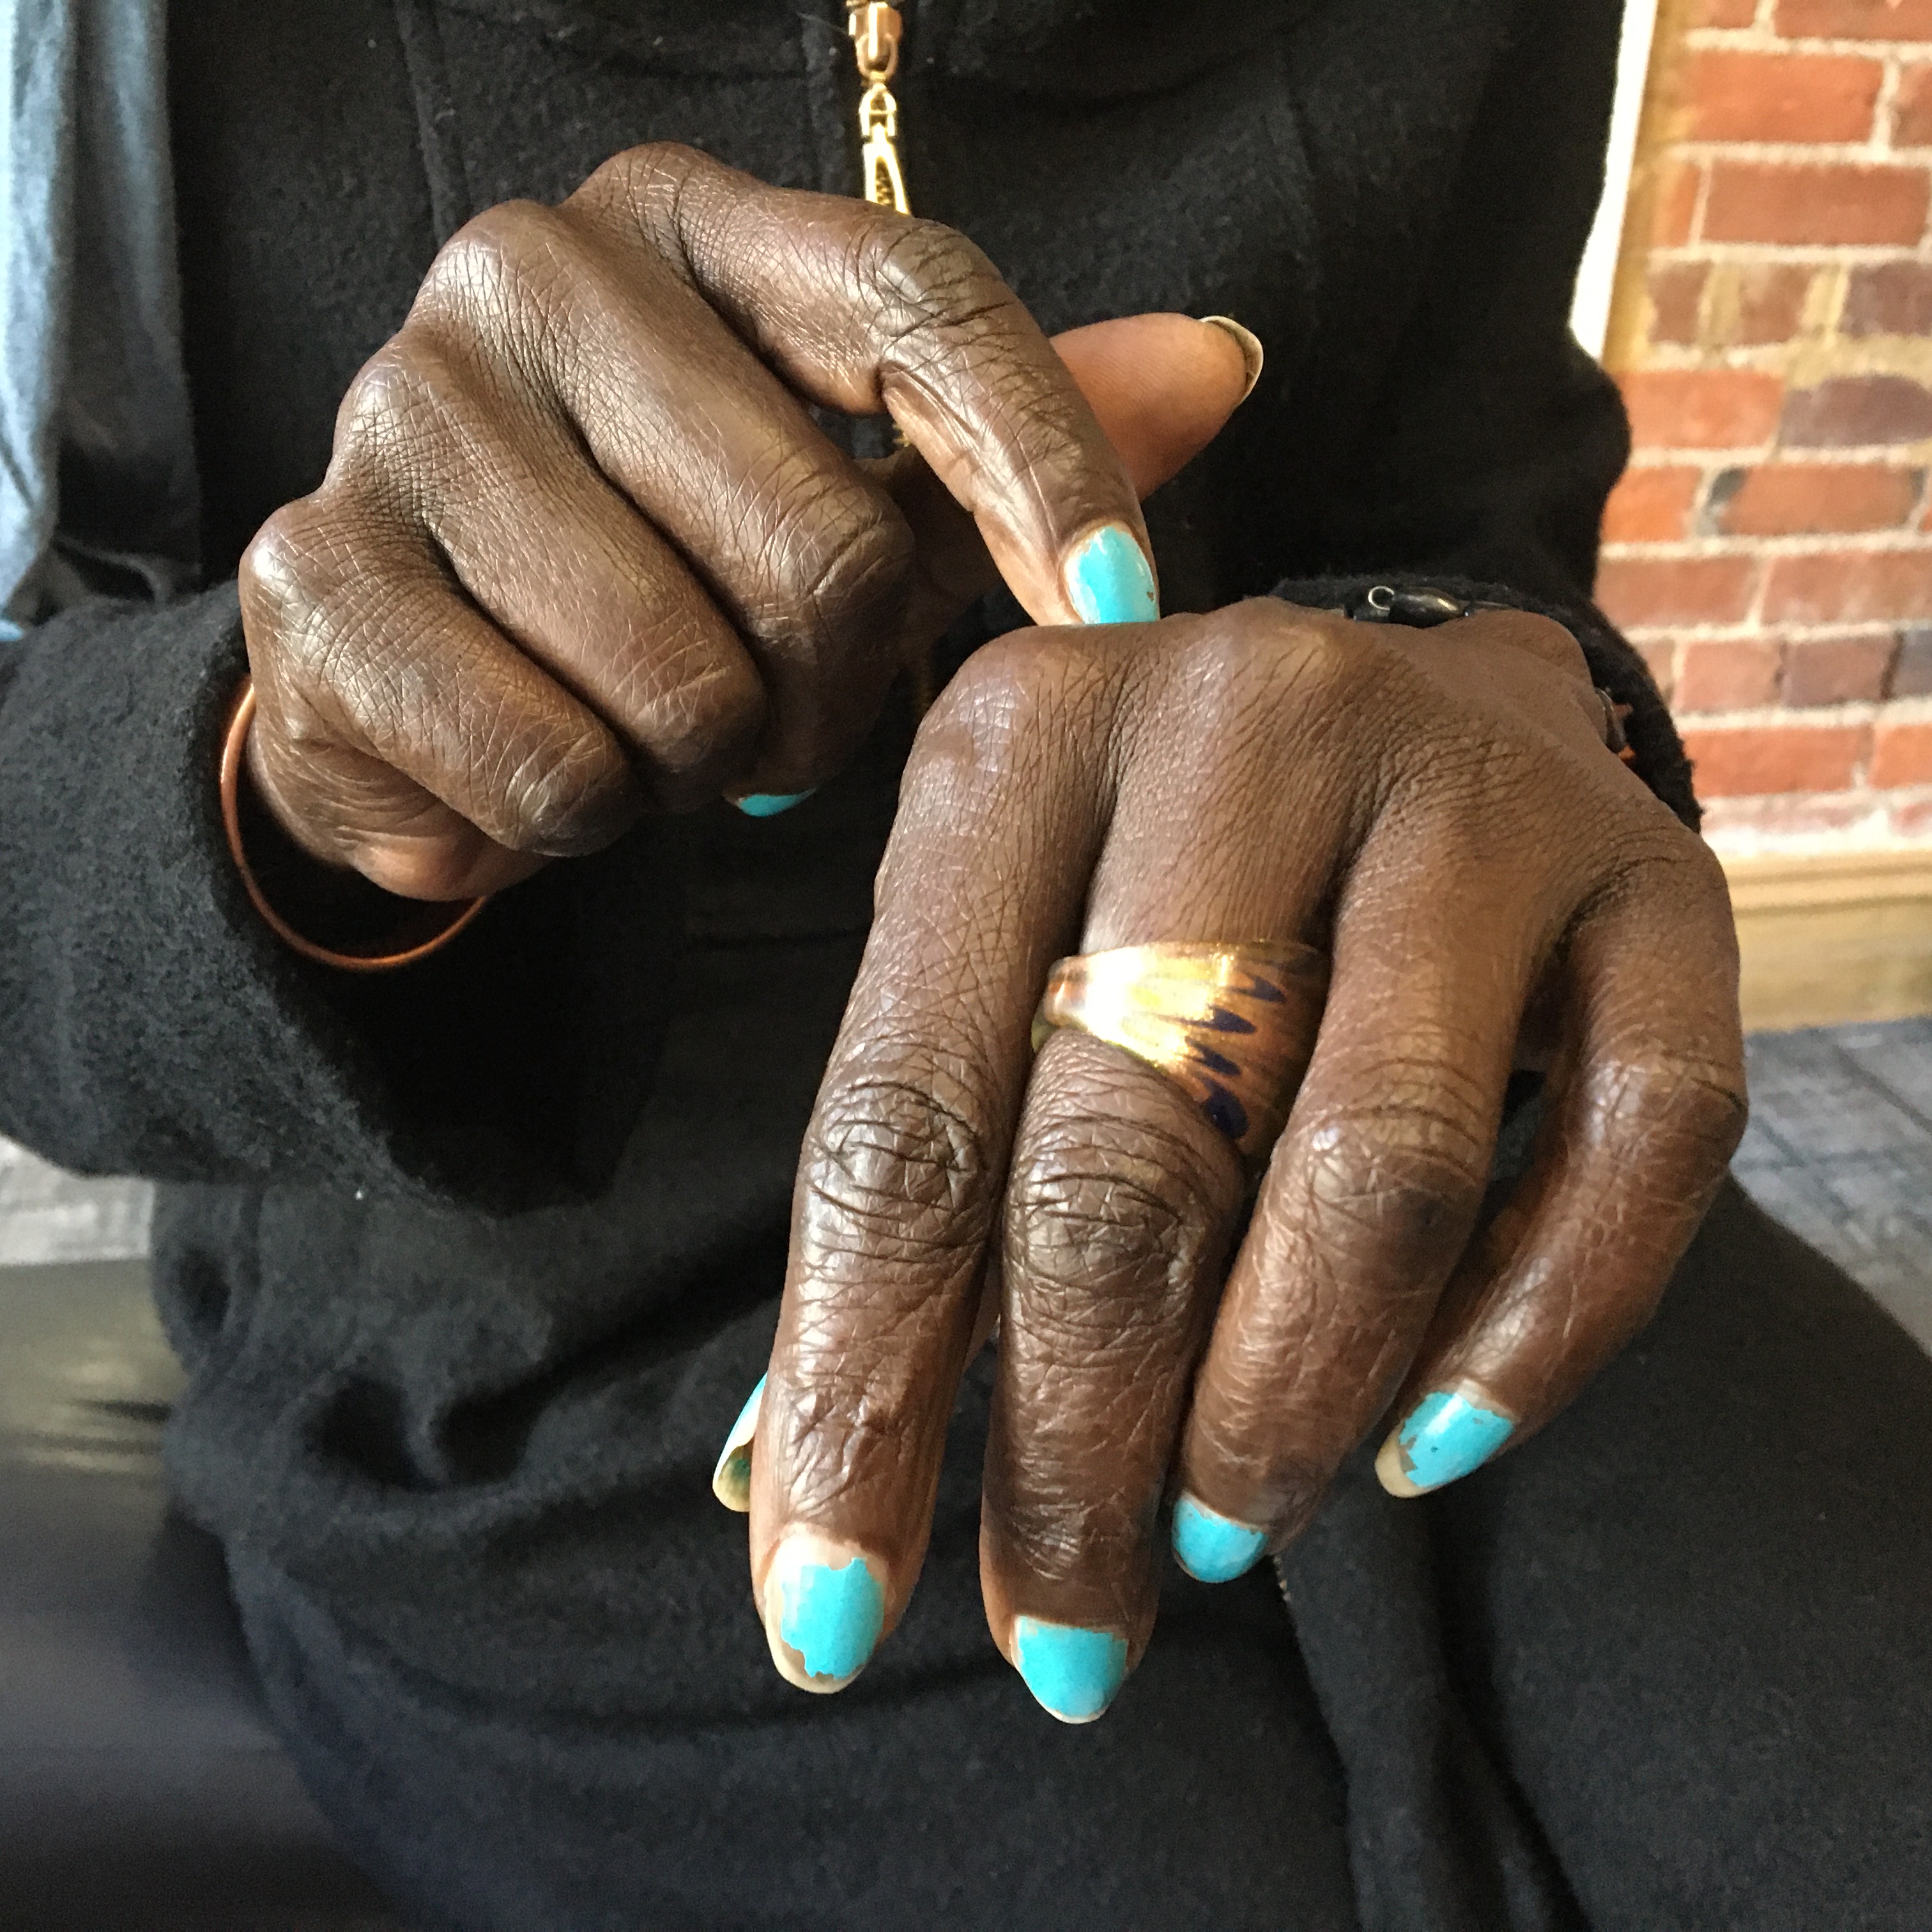 Two brown skin hands with aqua painted nails, one finger points to the top of the other hand.